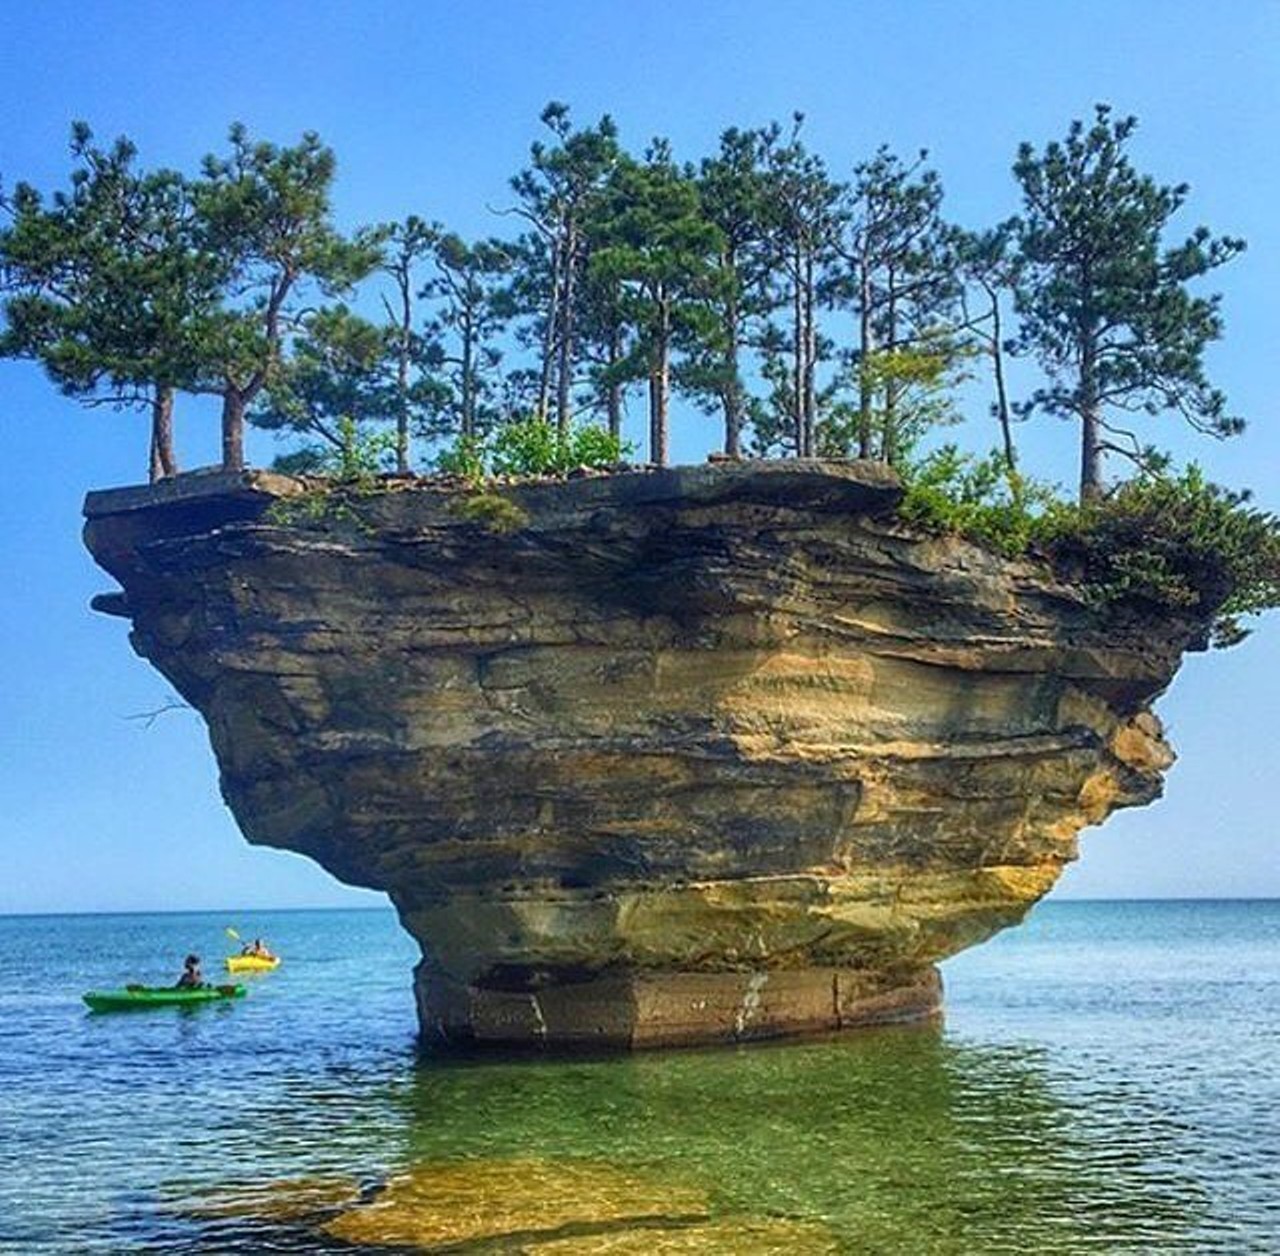 Turnip Rock, Port Austin
Located at the shores of Lake Huron in Port Austin, this beautiful large stone gets its shape from becoming separated from the main land from water erosion and you can only get there by boat and kayaks. On top of this rock, there are very large 20&#146; high trees.  (Photo via Turnip Rock official travel page)